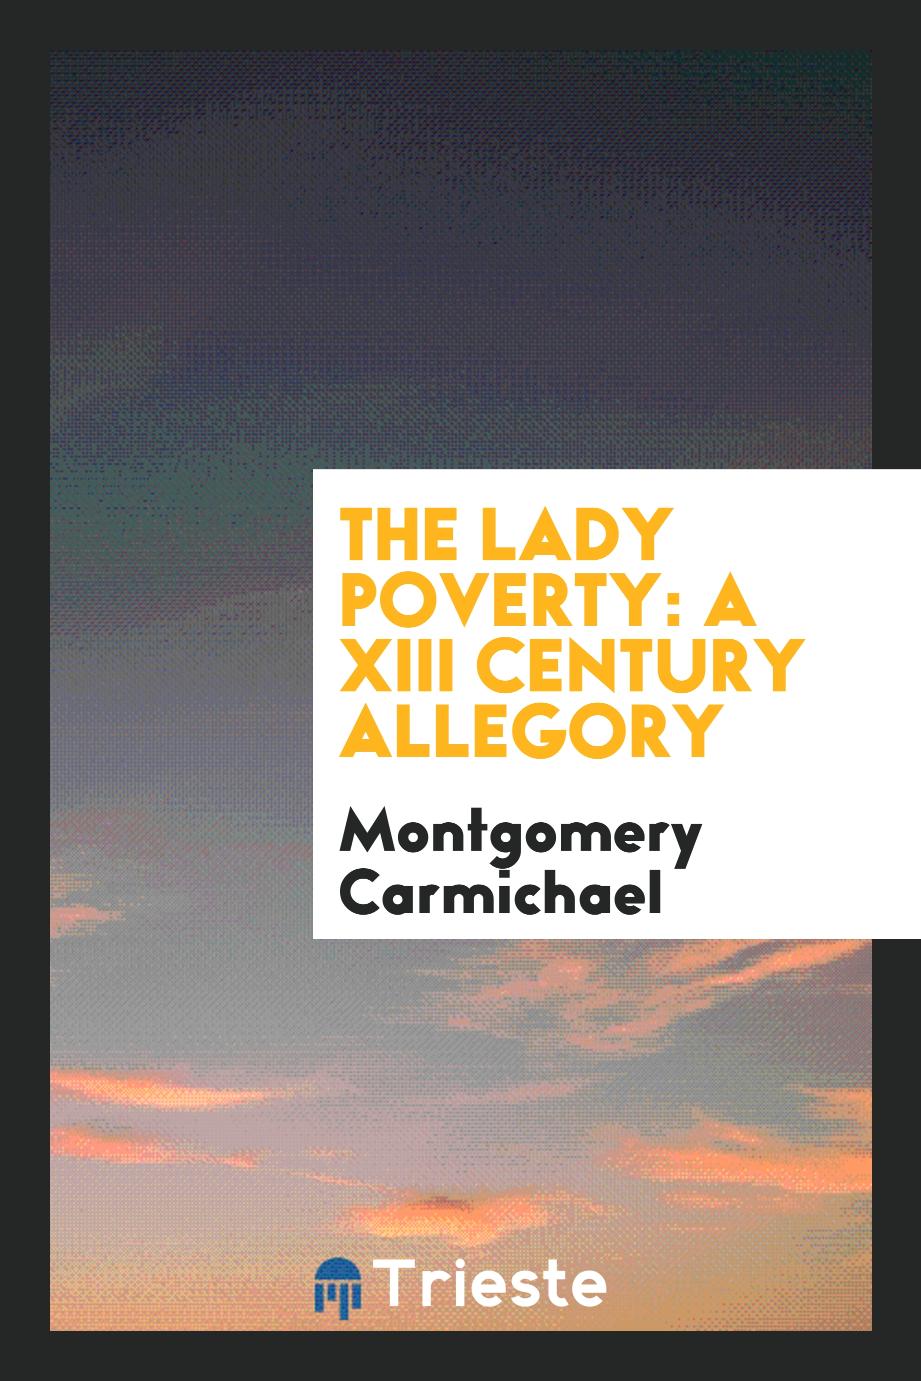 The Lady Poverty: a XIII century allegory